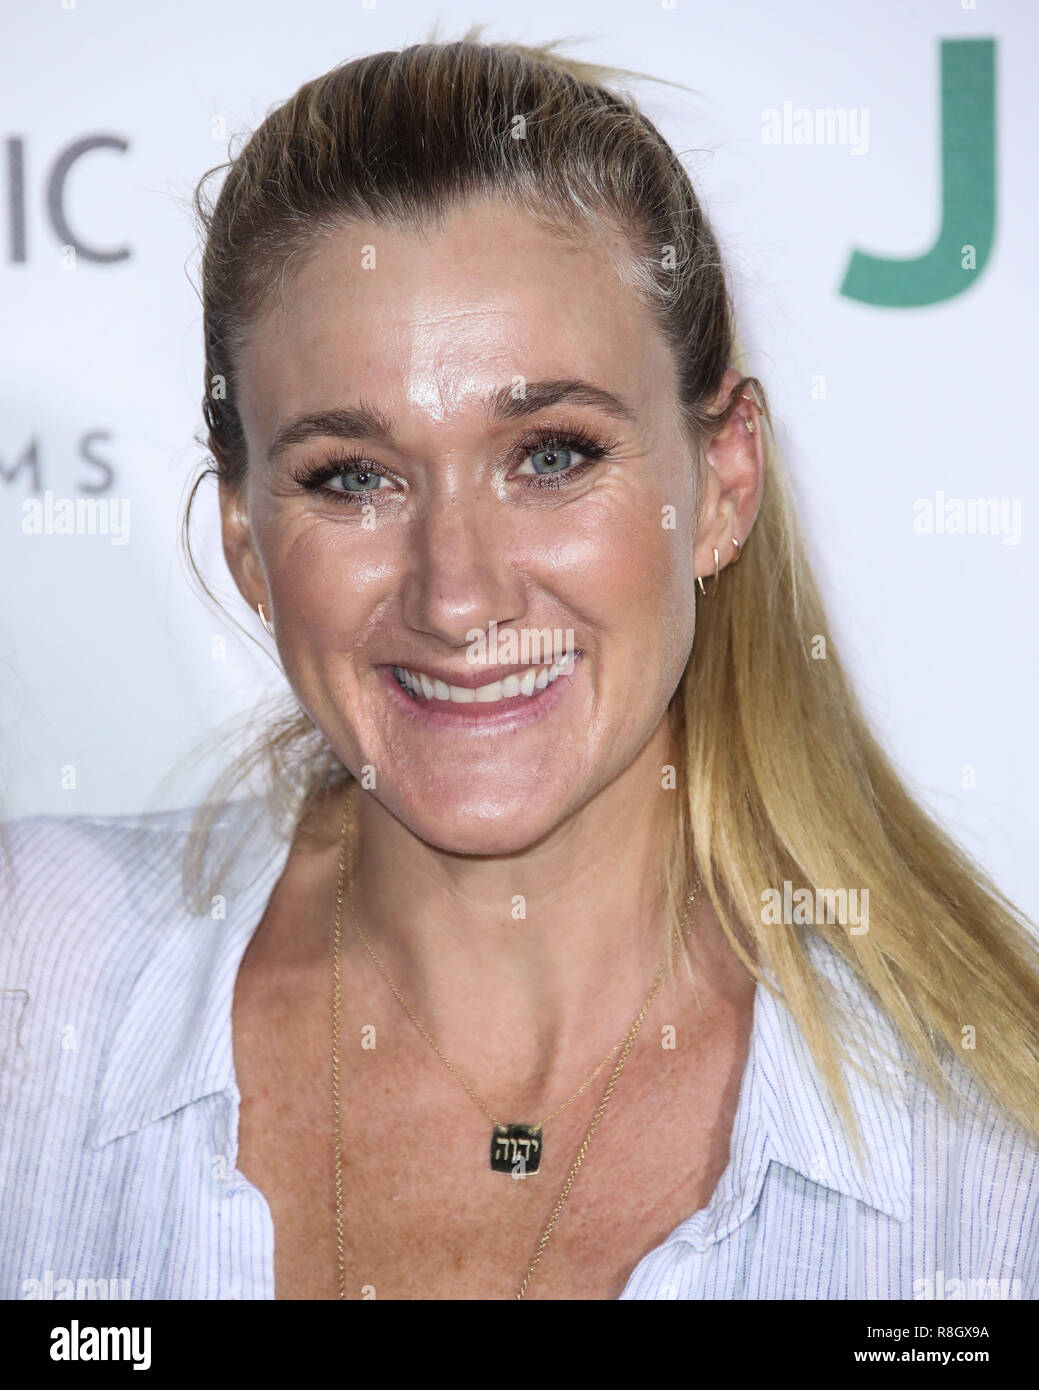 HOLLYWOOD, LOS ANGELES, CA, USA - OCTOBER 09: Keri Jennings Walsh at the Los Angeles Premiere Of National Geographic Documentary Films' 'Jane' held at the Hollywood Bowl on October 9, 2017 in Hollywood, Los Angeles, California, United States. (Photo by Xavier Collin/Image Press Agency) Stock Photo